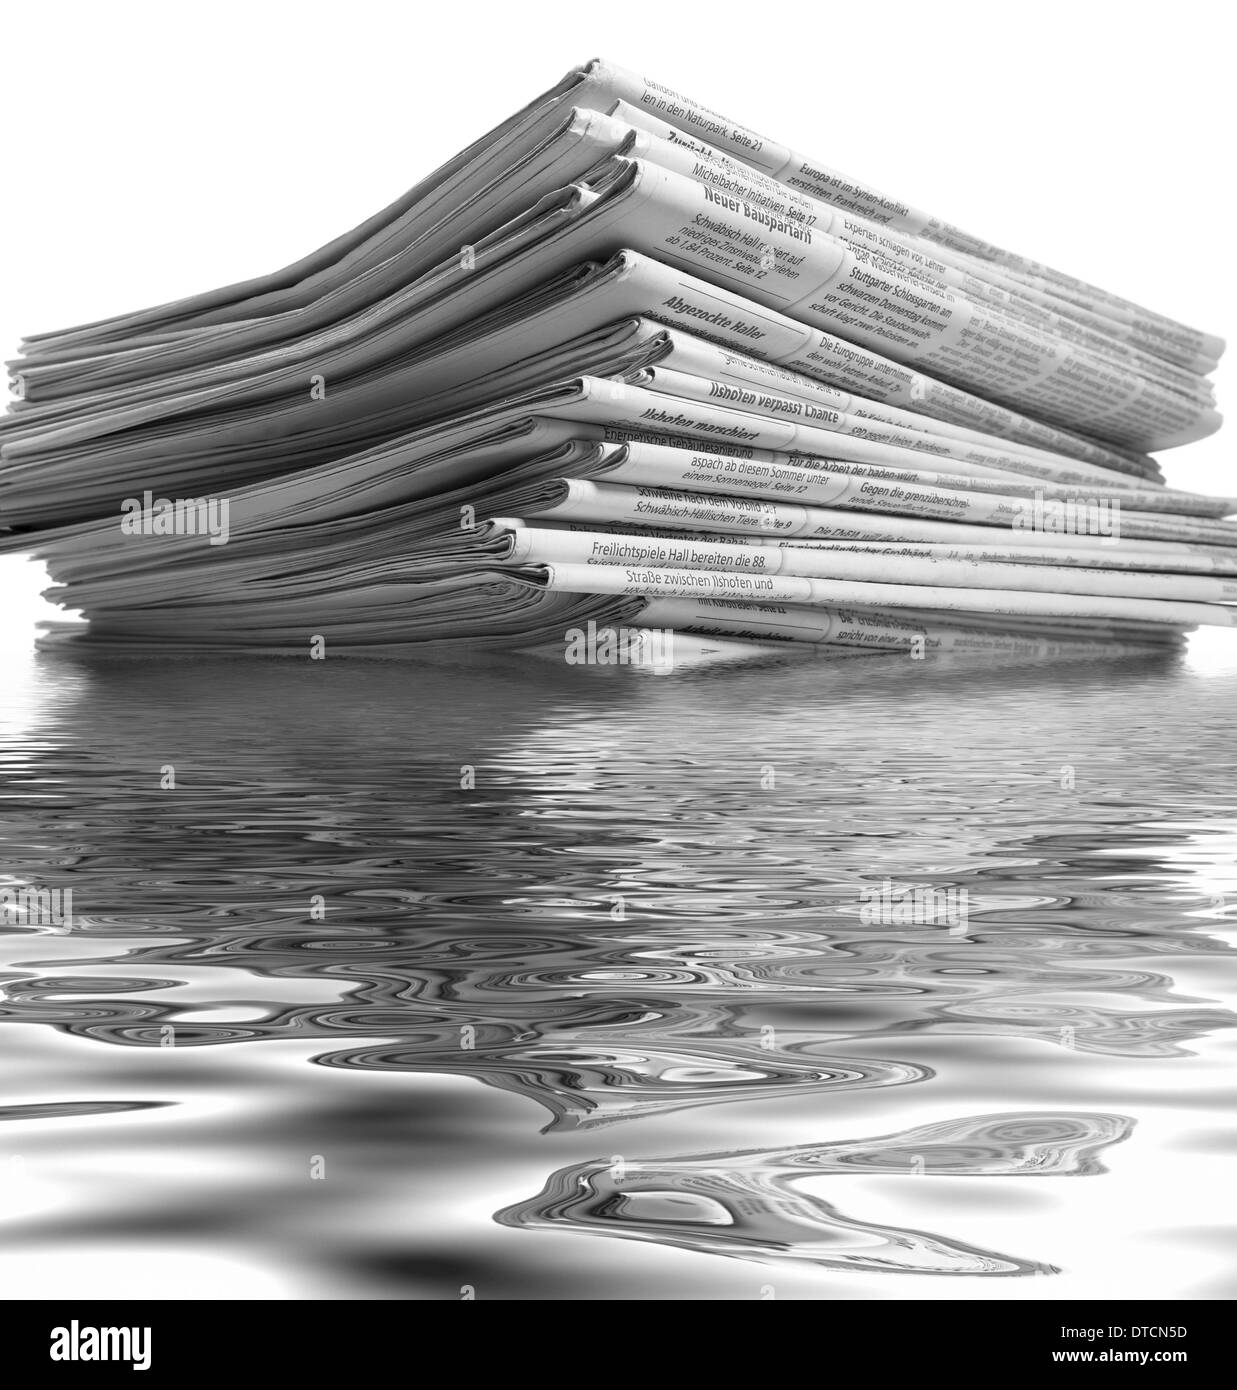 partly sunken stack of newspapers on reflective water surface Stock Photo